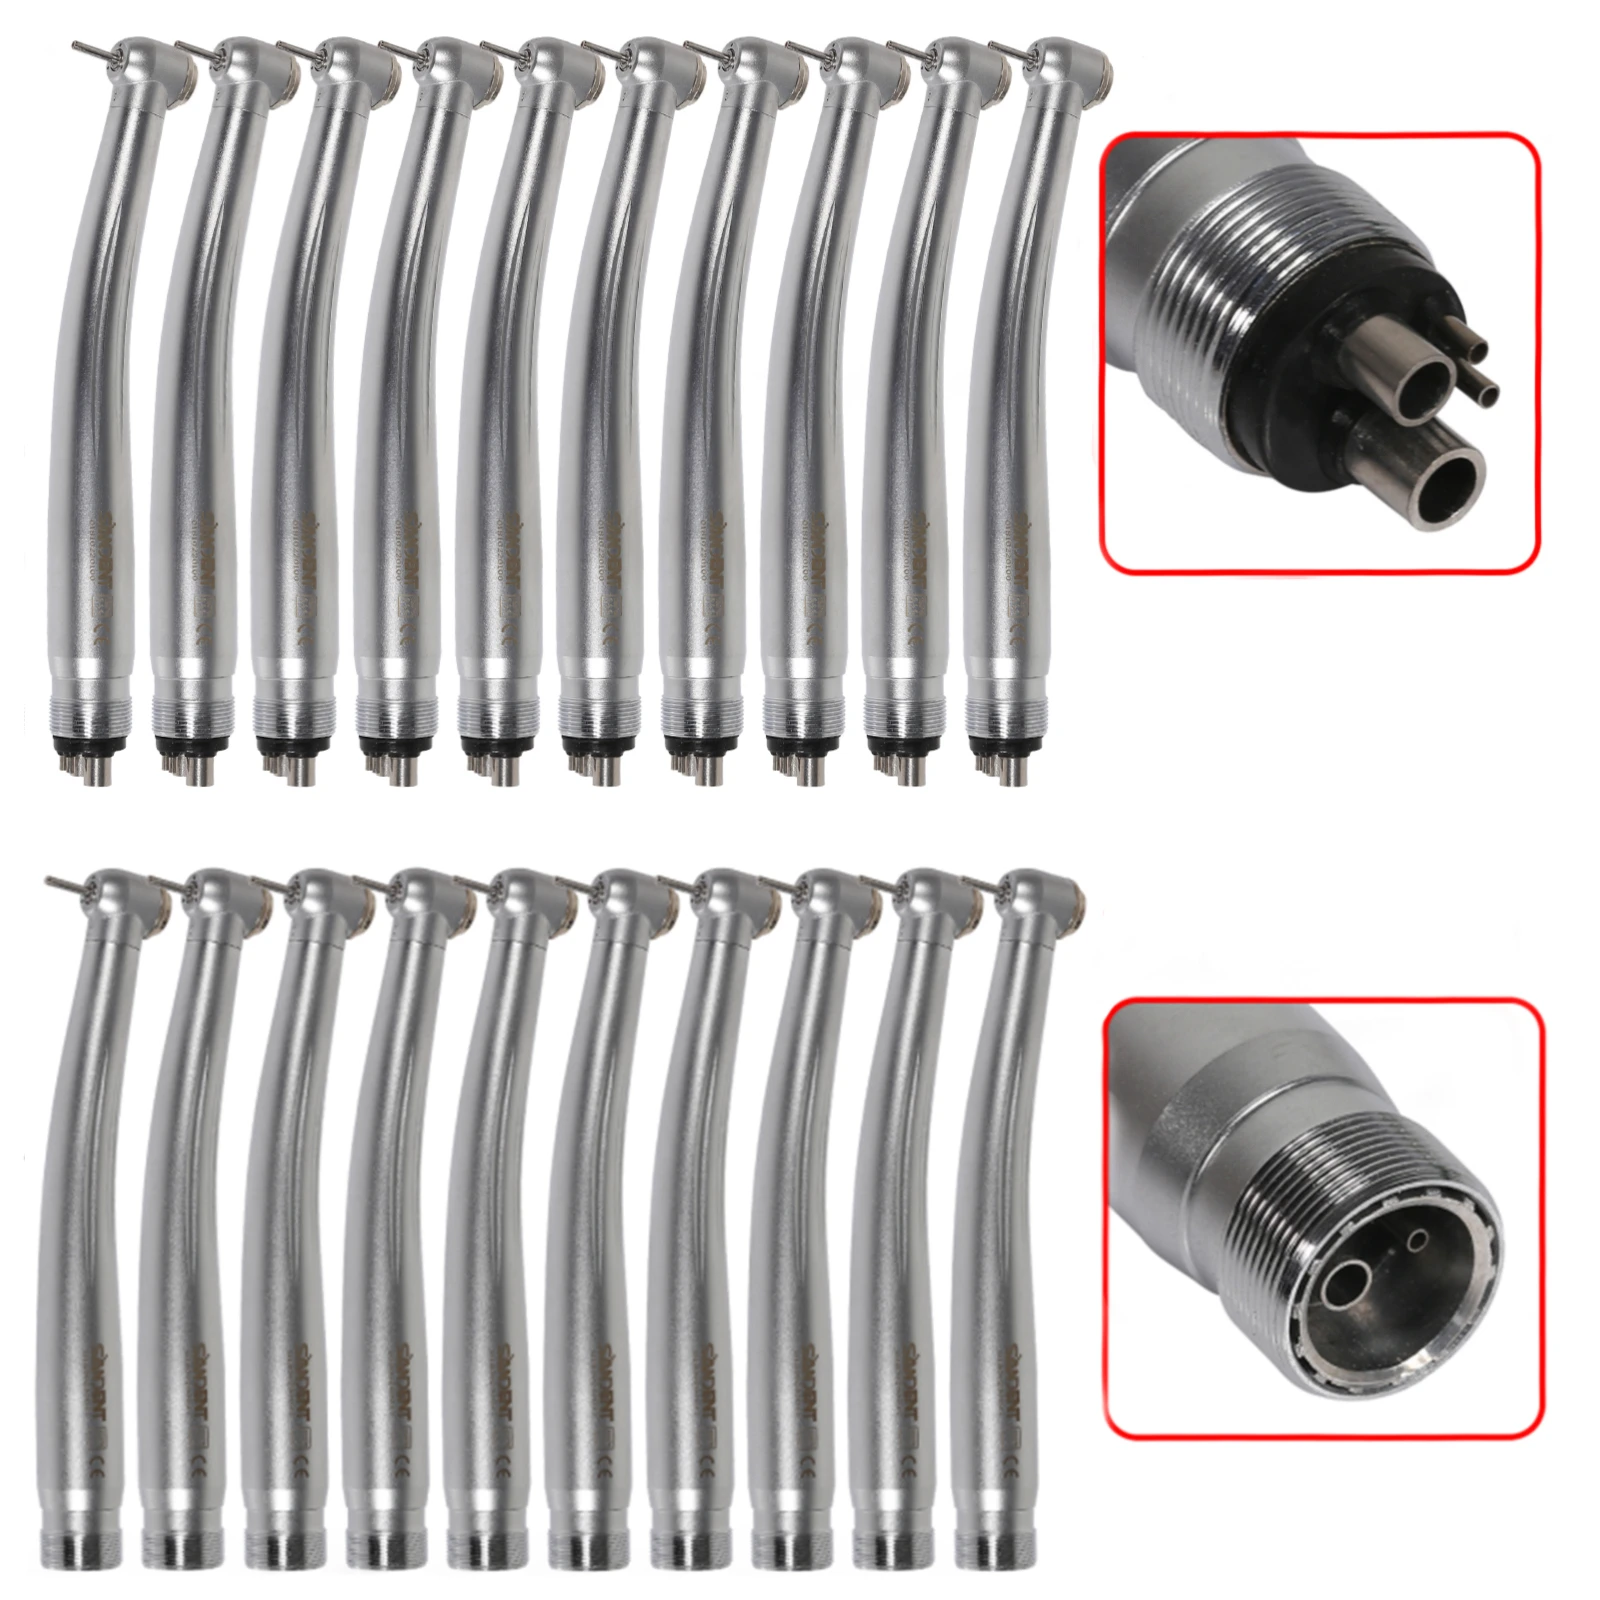 10Pcs SANDENT NSK Style Pana Max Dental High Speed 2/4Hole Handpiece Push Button /Replace Rotor